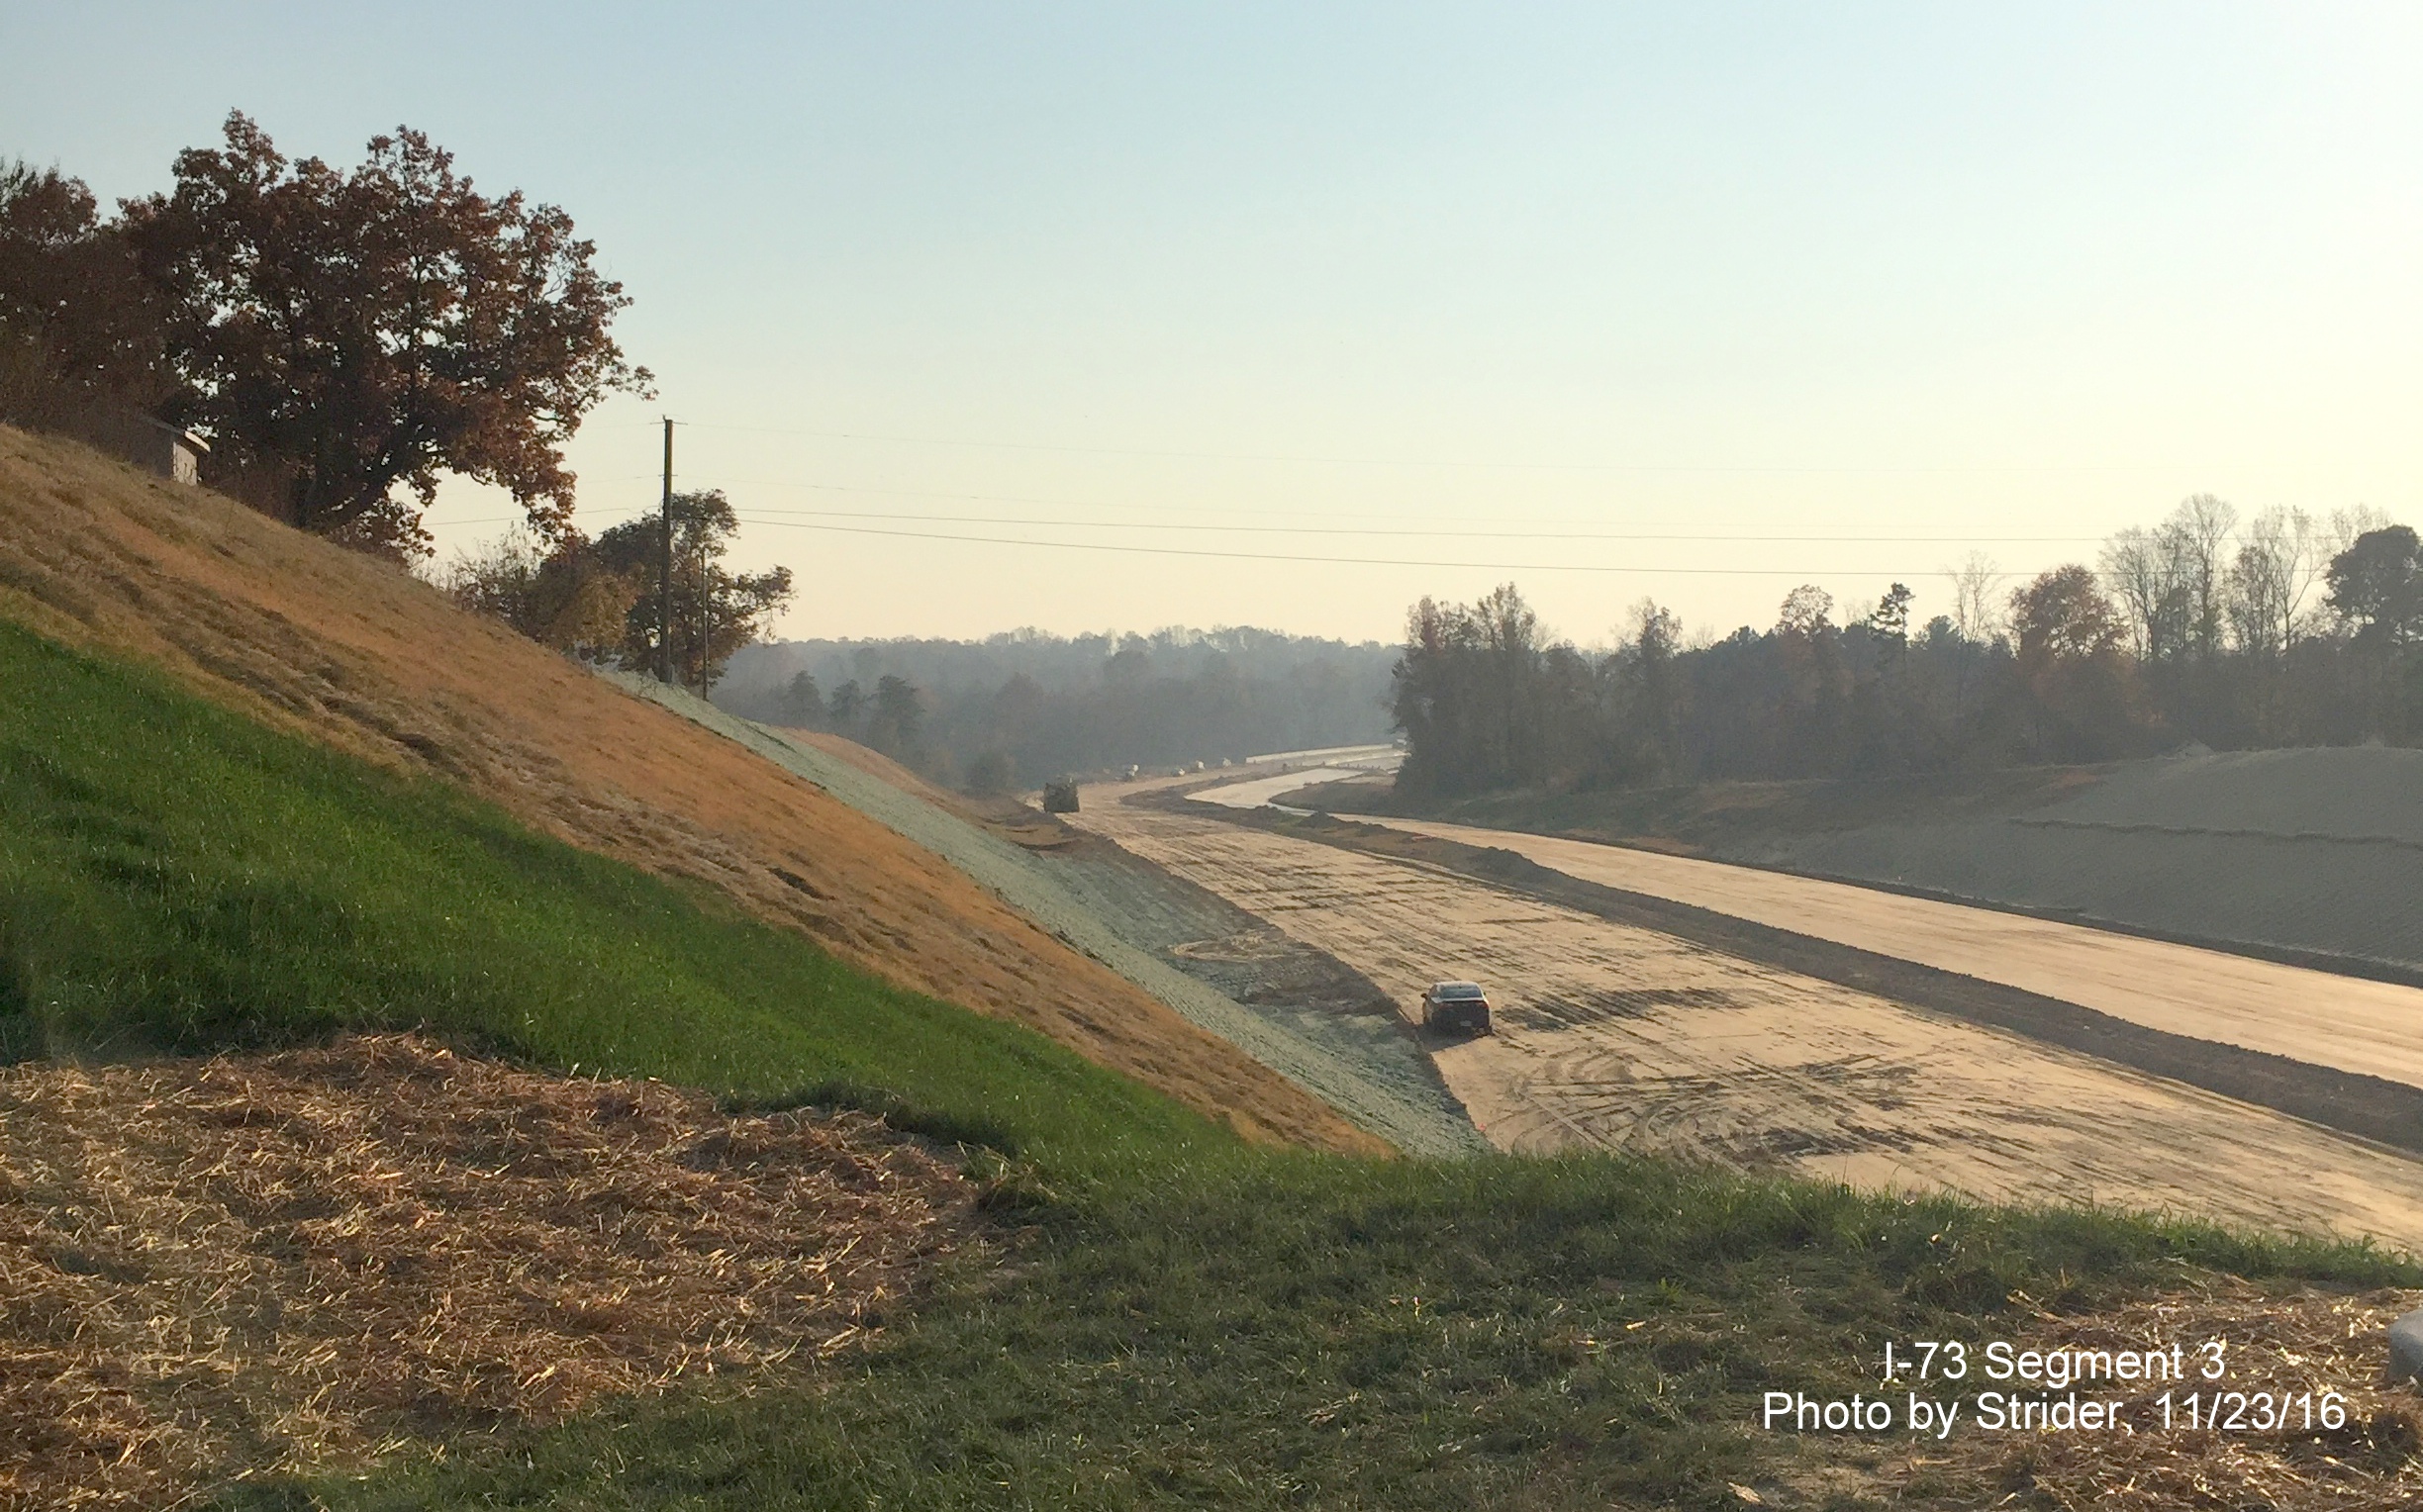 Image of view looking south from Brookbank Road on progress building new I-73 lanes near Summerfield, by Strider